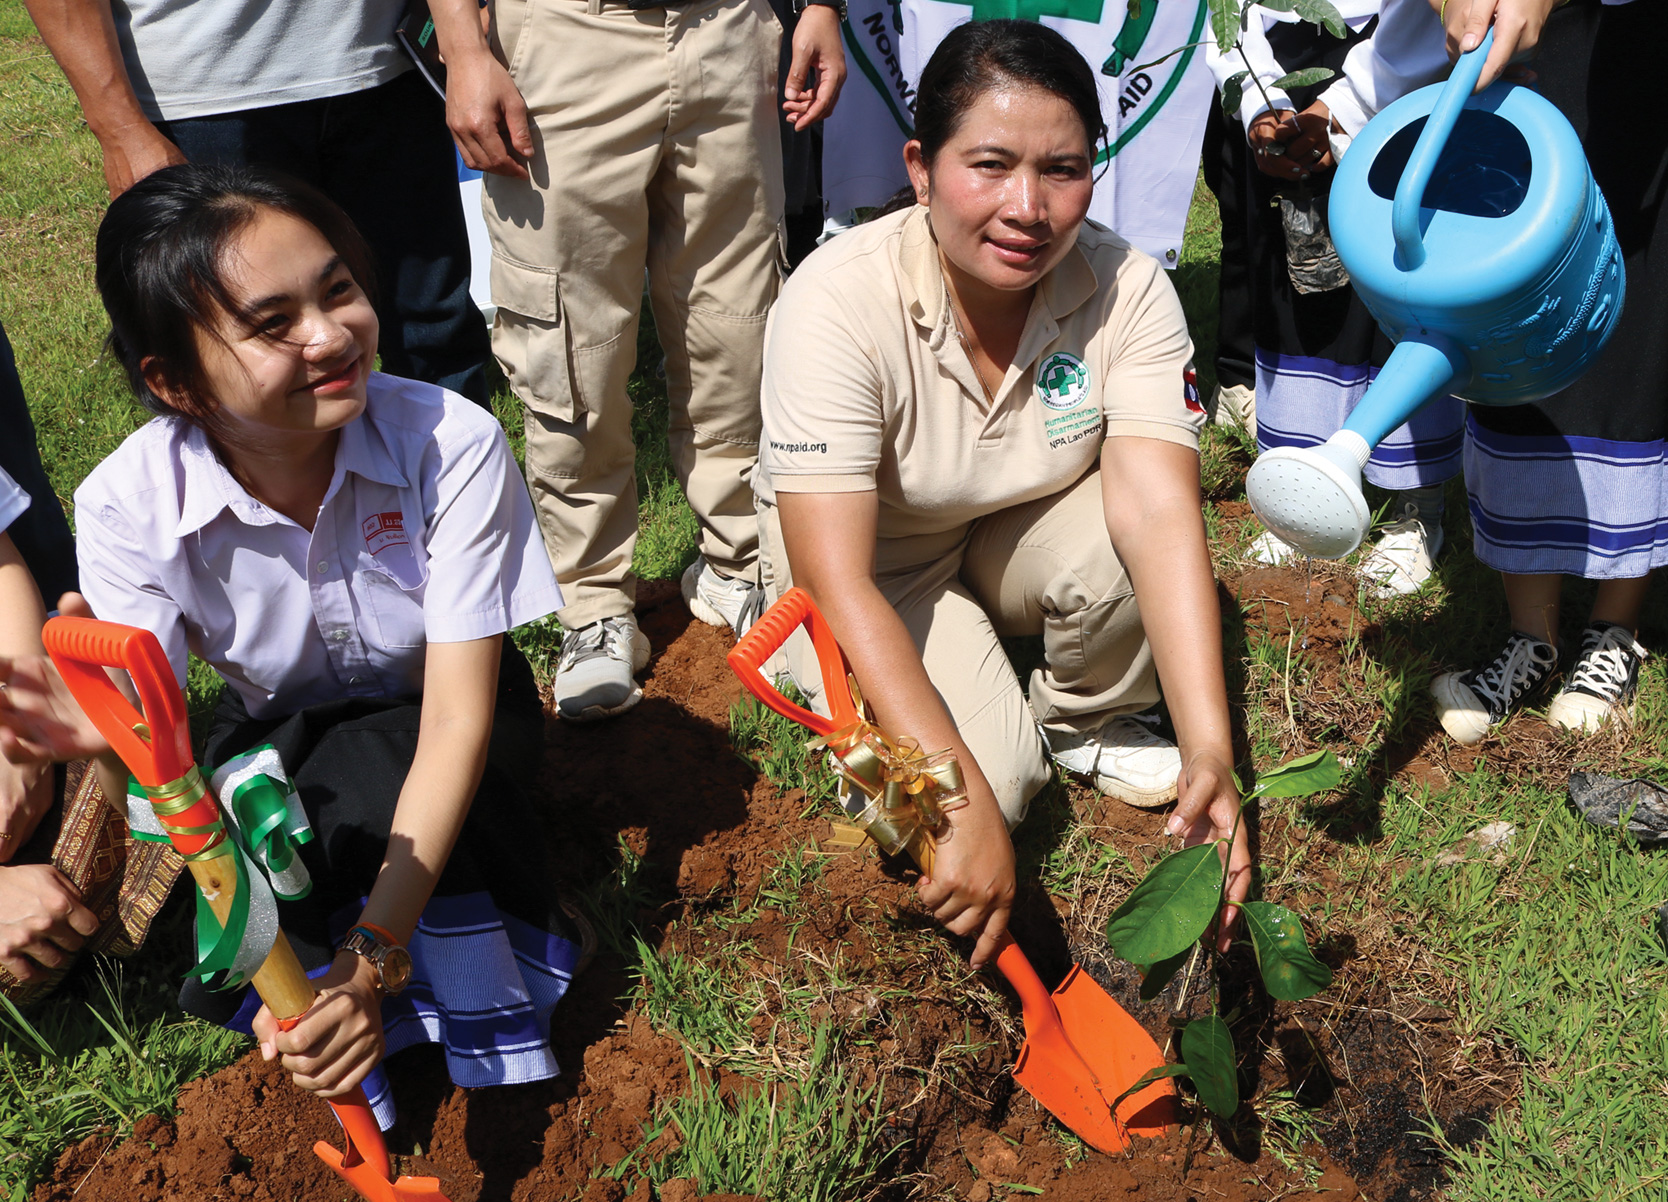 Two women with shovels squatting down to dig small holes in the ground to plant small trees.